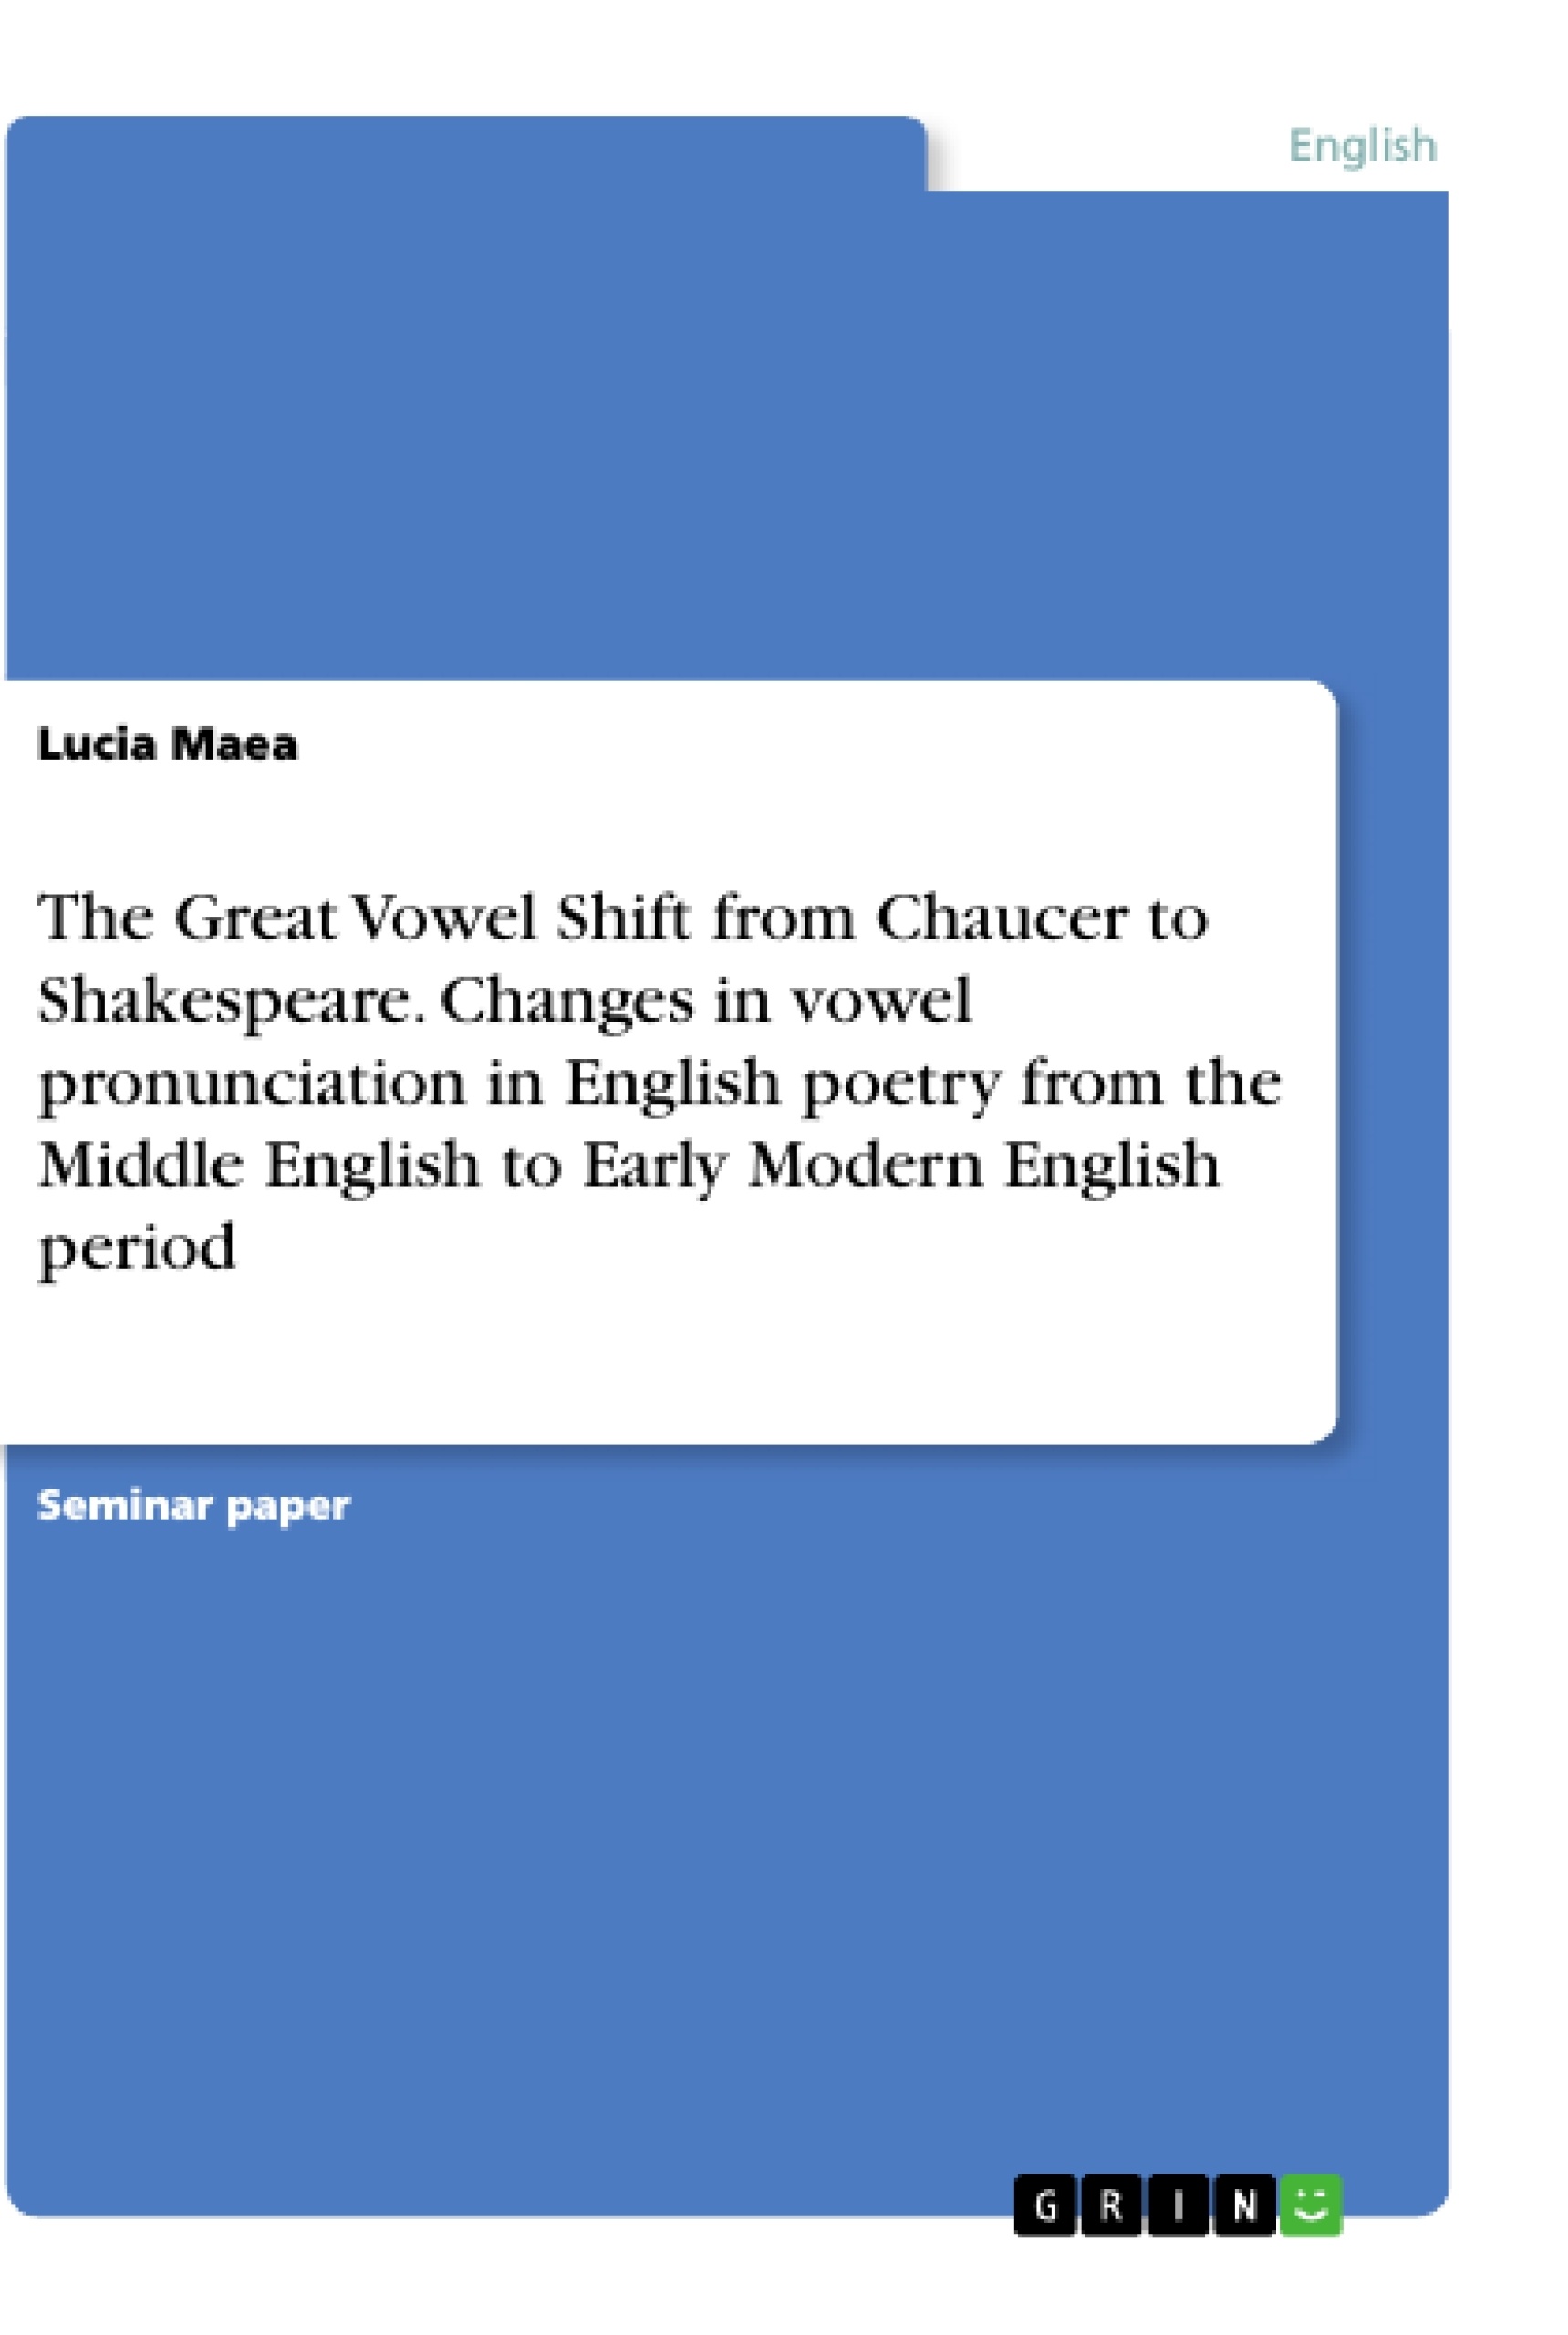 Title: The Great Vowel Shift from Chaucer to Shakespeare. Changes in vowel pronunciation in English poetry from the Middle English to Early Modern English period